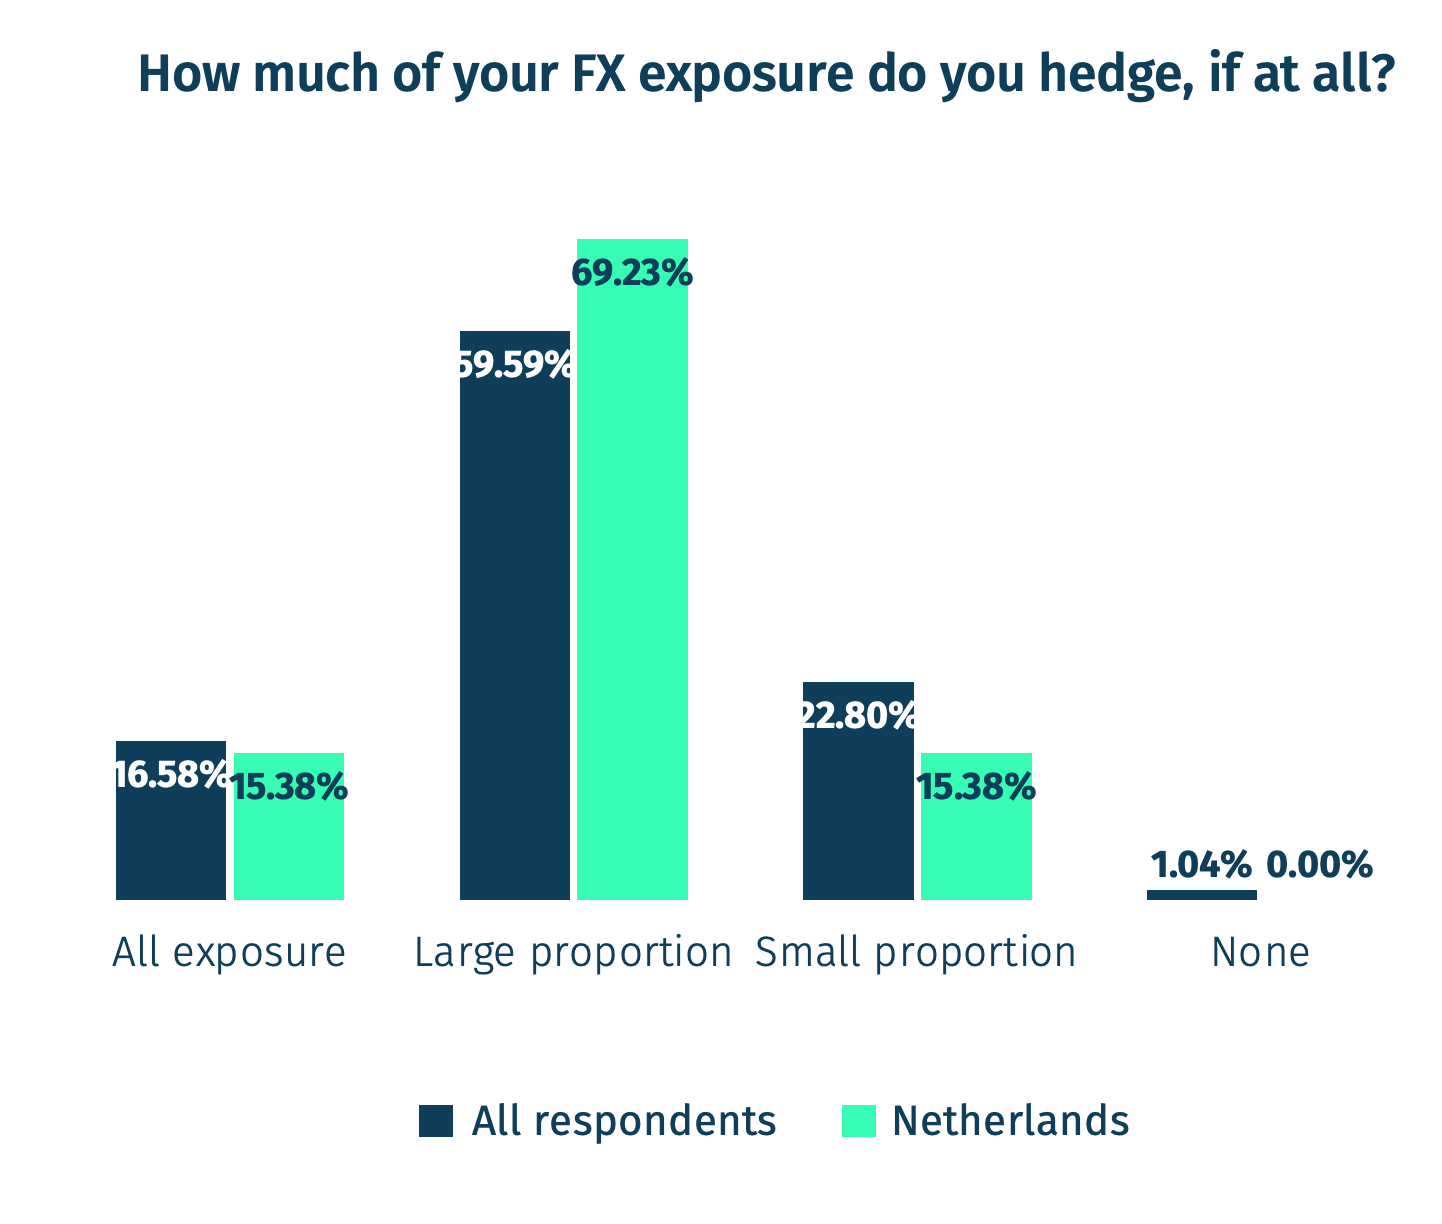 Graph representing how much FX exposure Netherland fund managers hedge